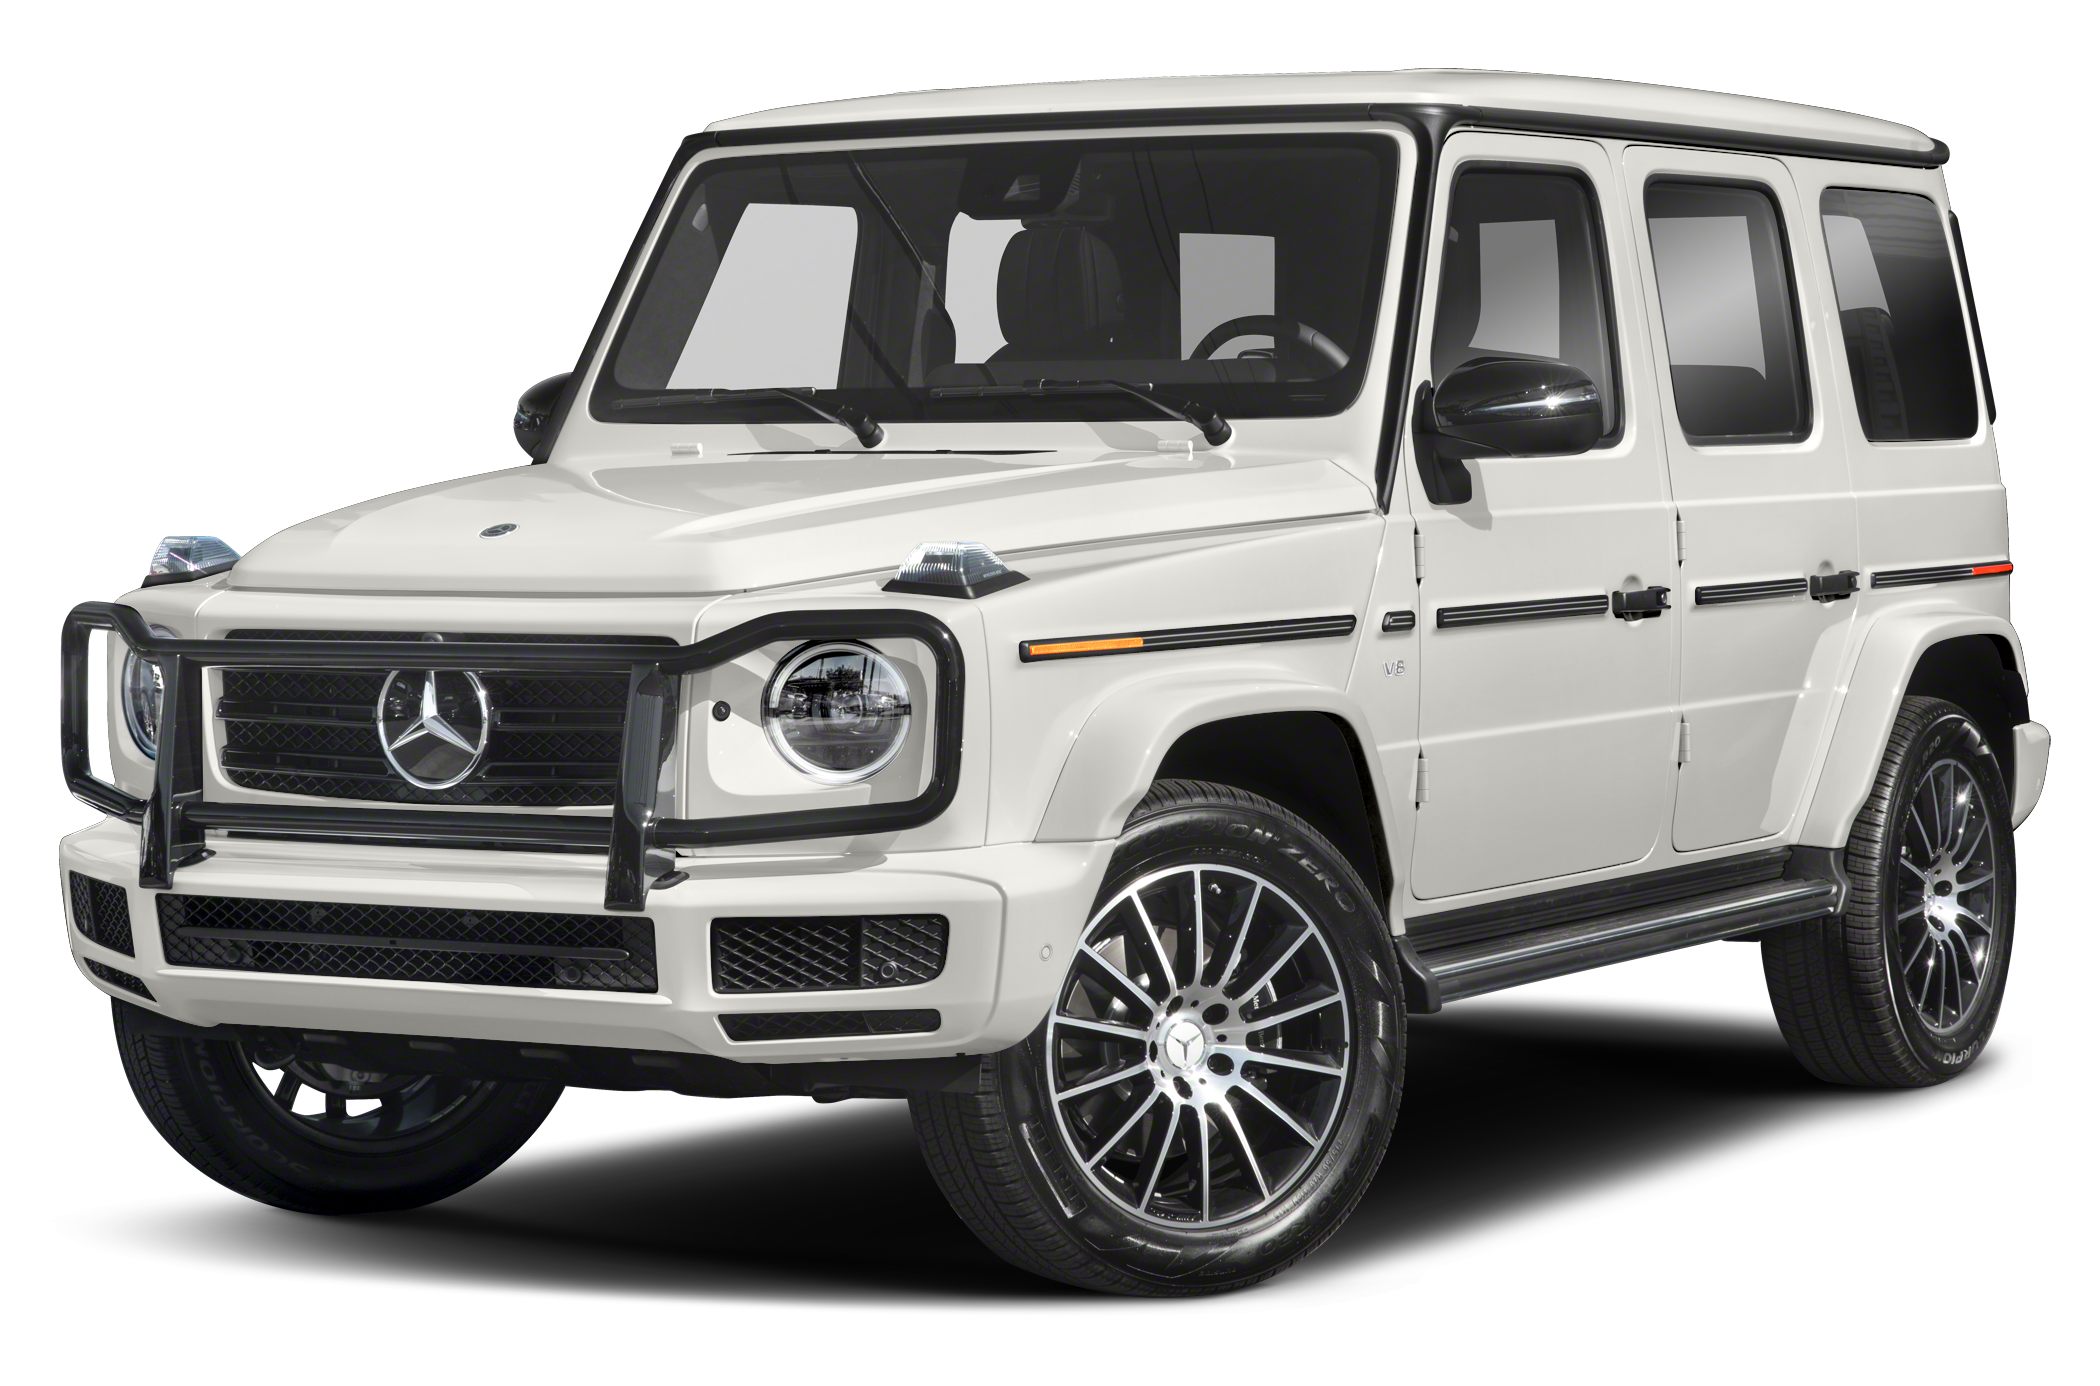 New 21 Mercedes Benz G Class For Sale At Mercedes Benz Of South Orlando Vin